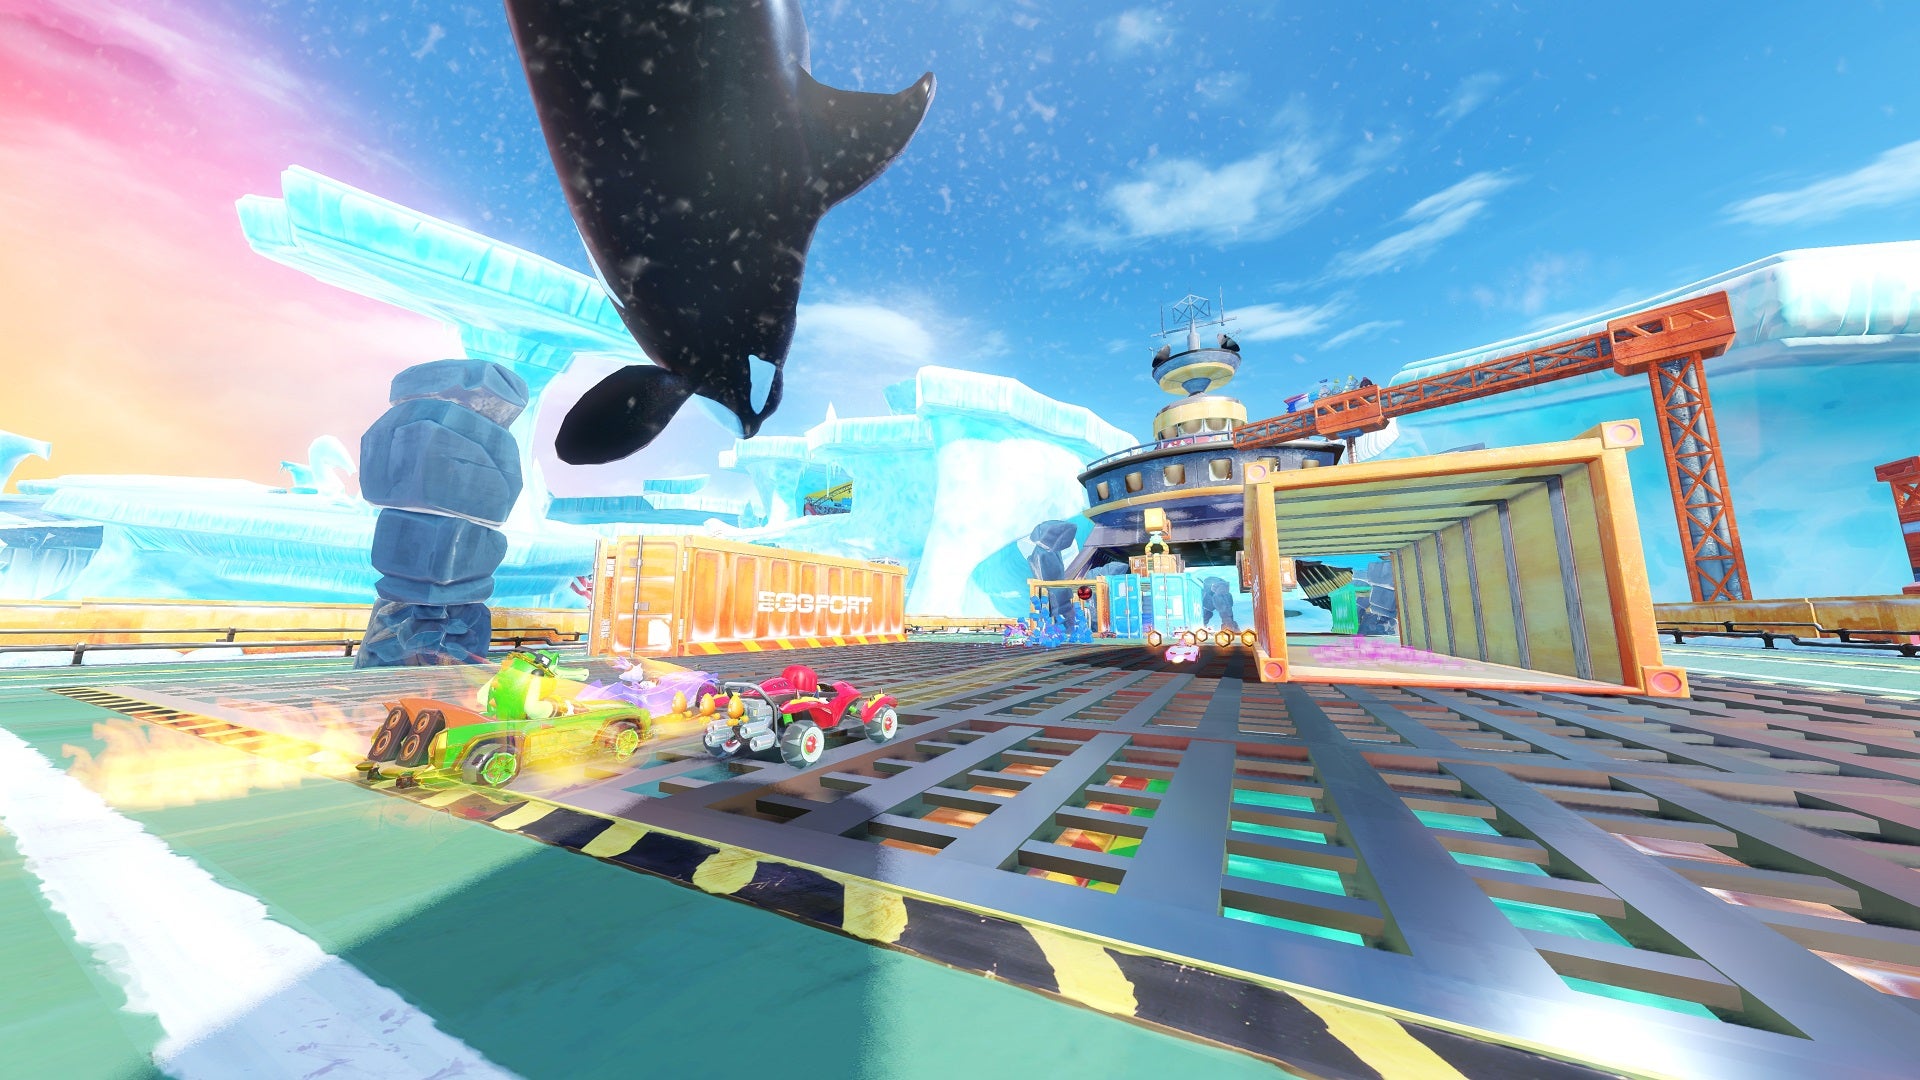 A screenshot of a scene from a Nintendo Switch game called Team Sonic Racing